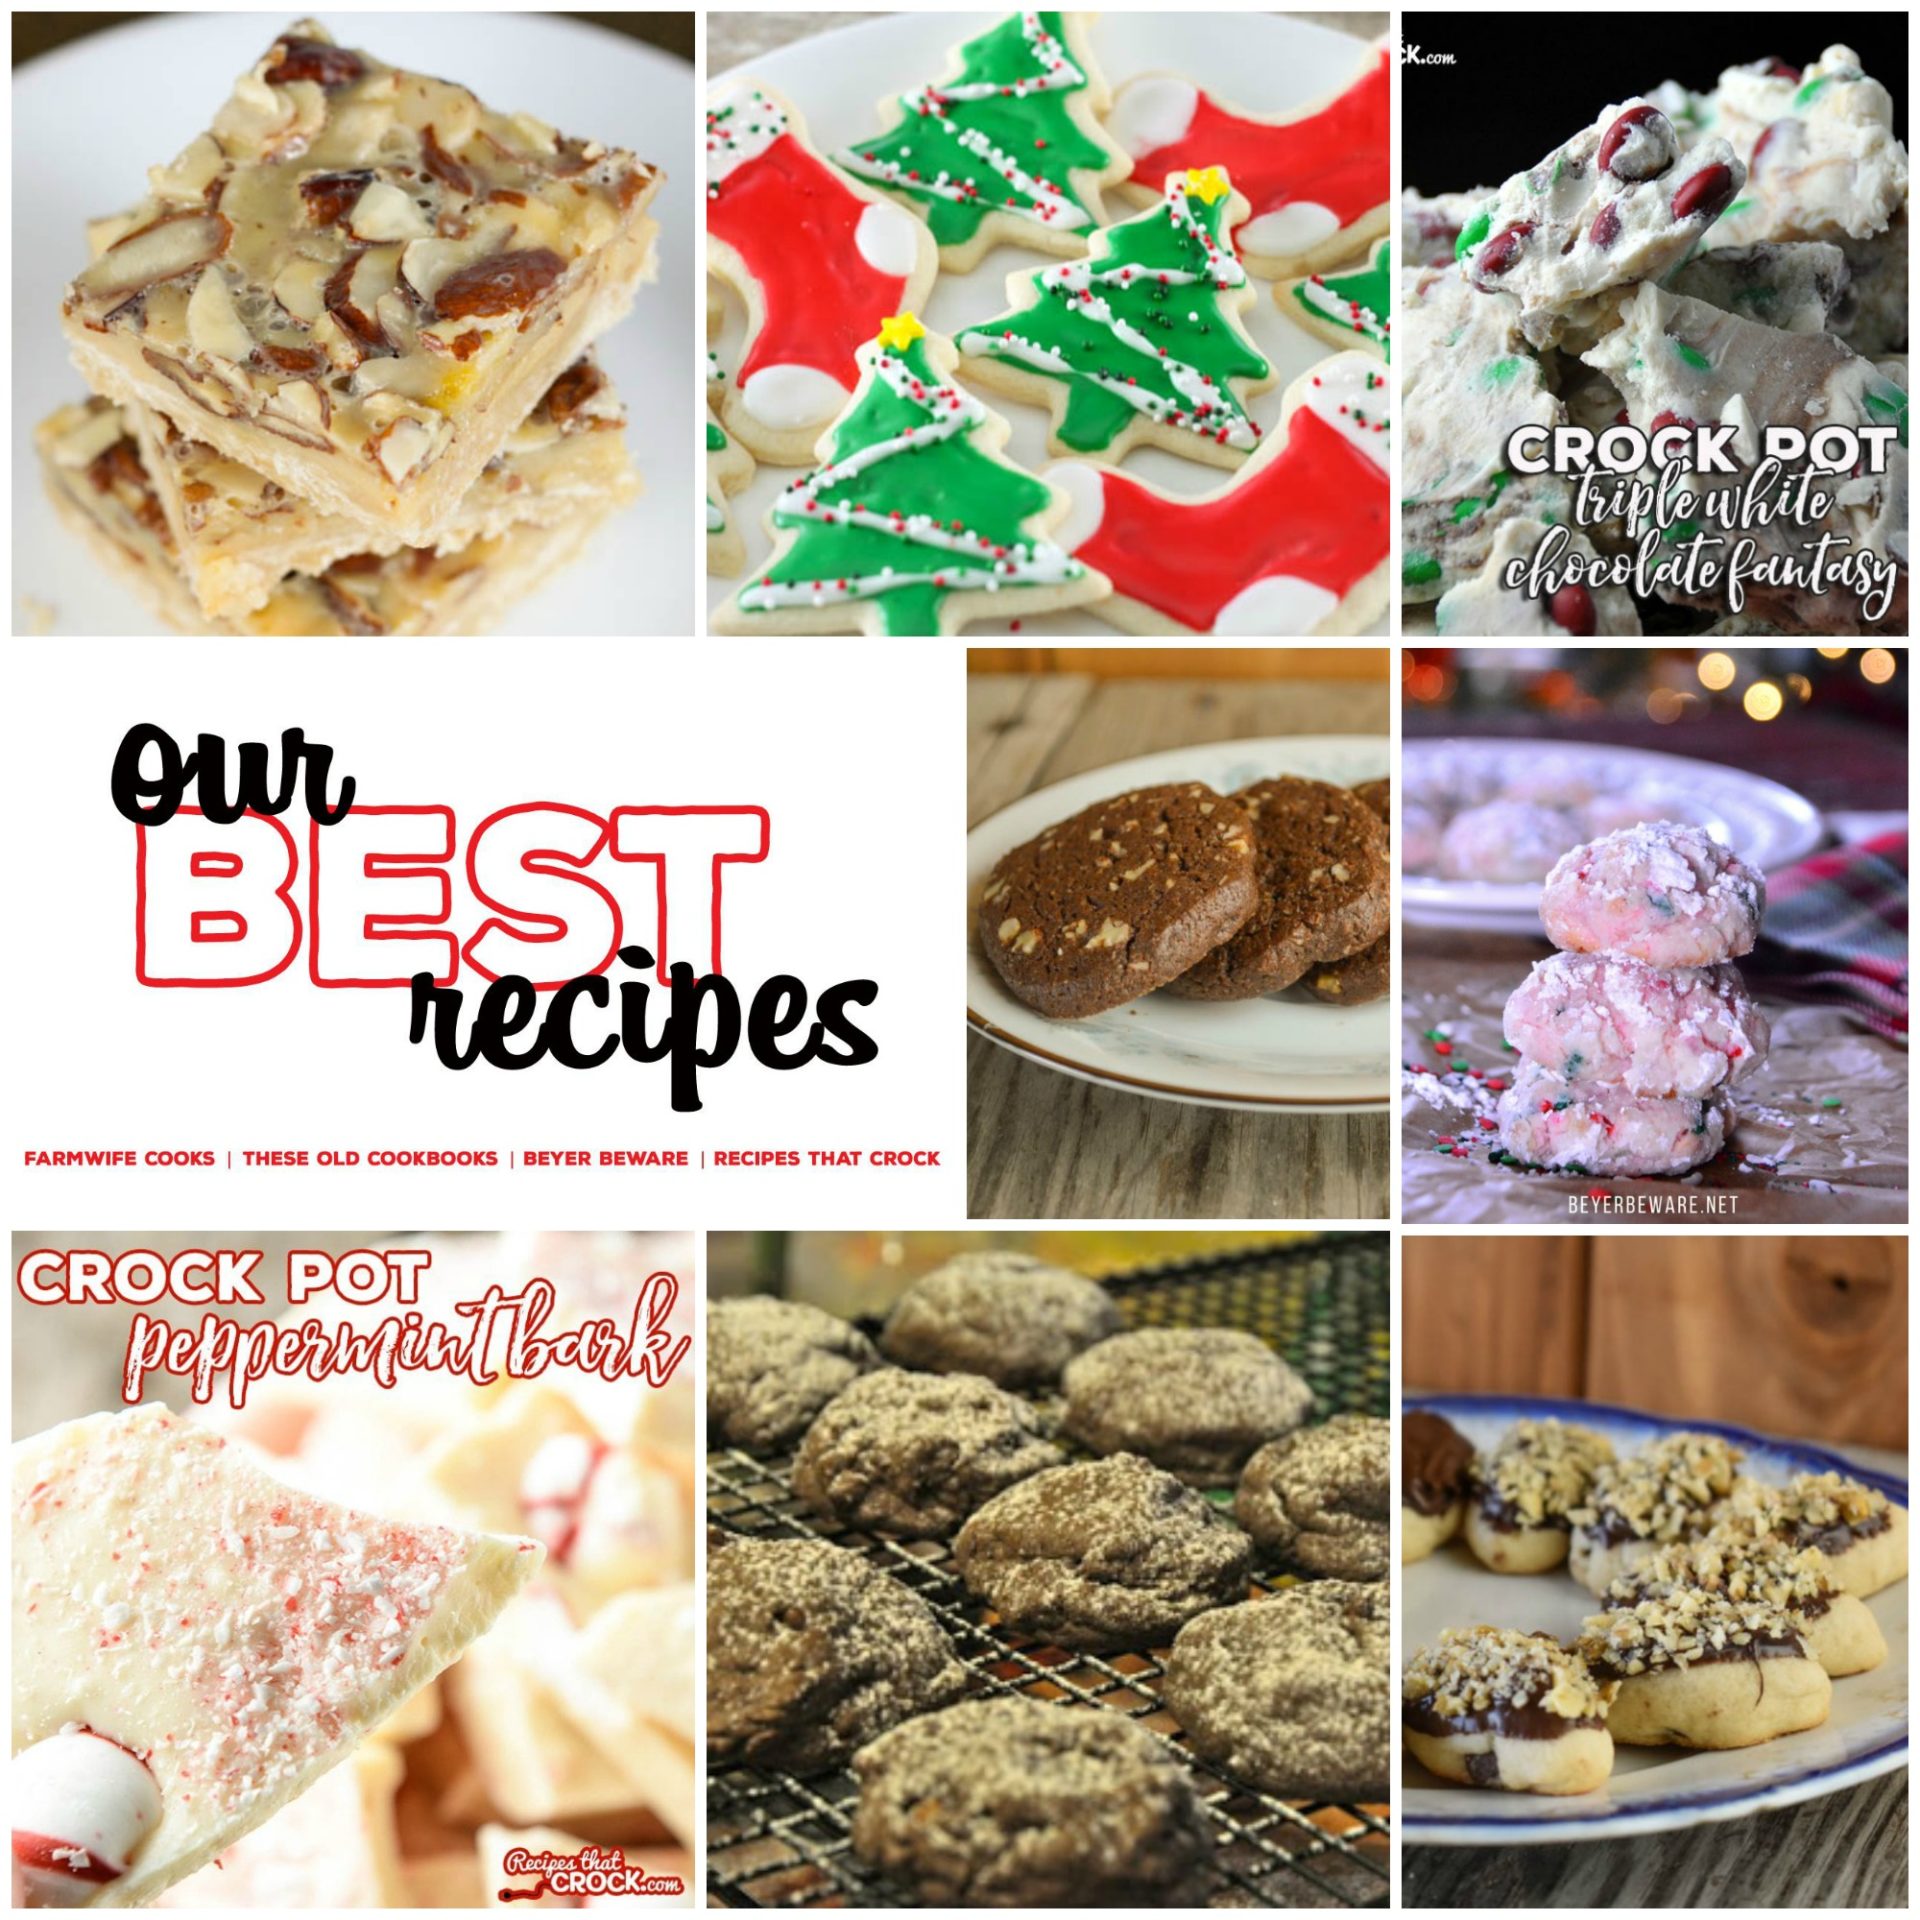 9 Christmas Treat Recipes (Our Best Recipes)